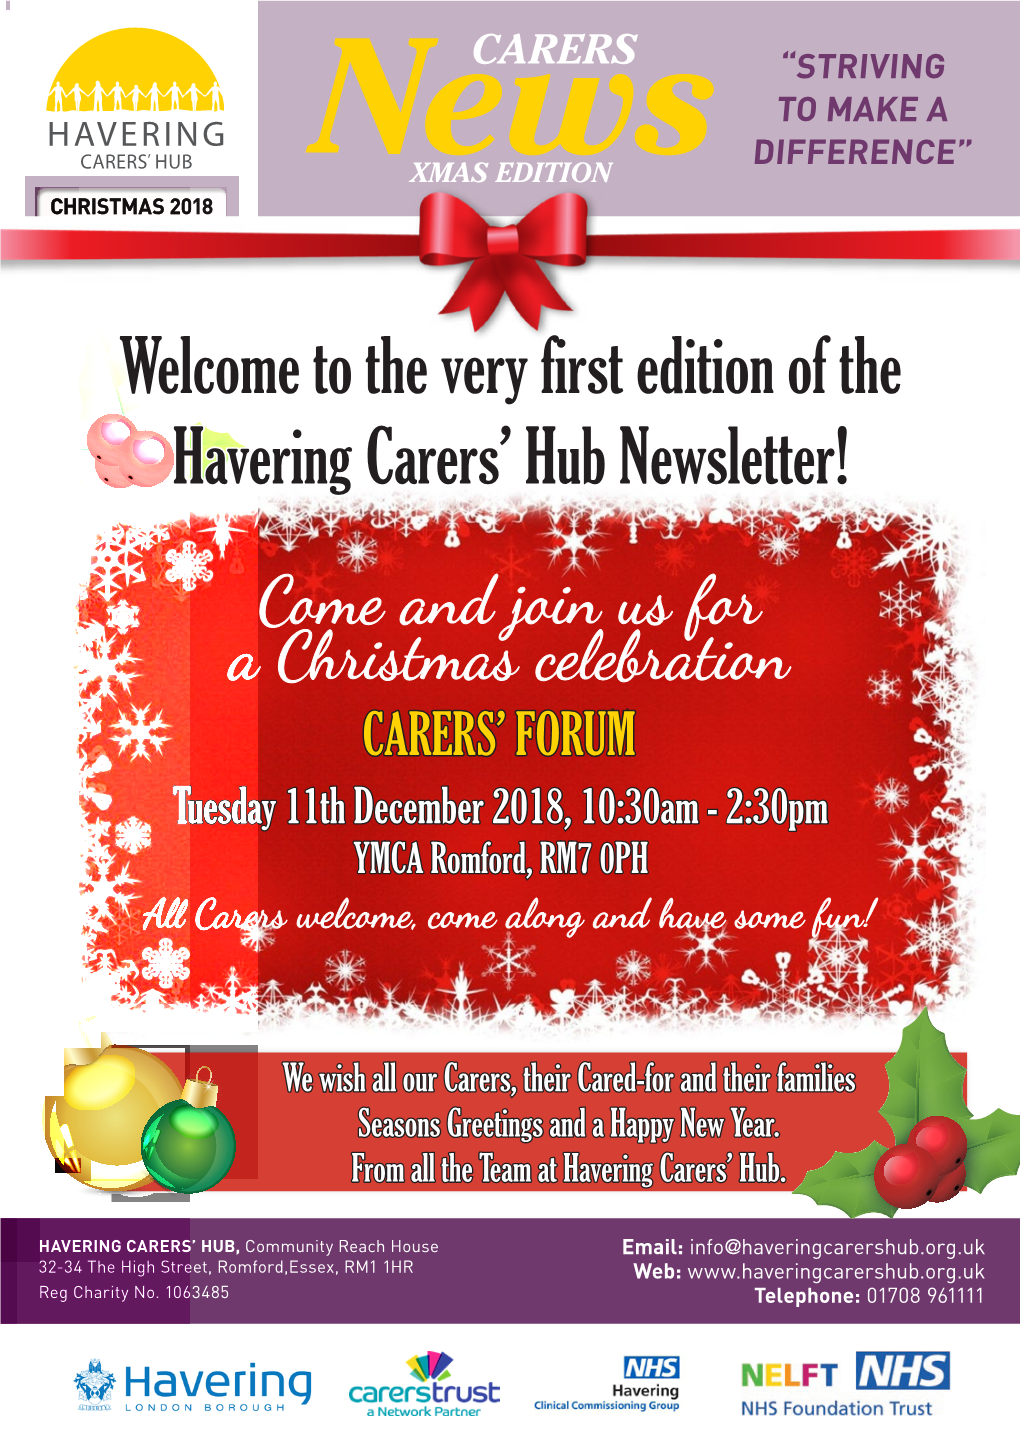 Welcome to the Very First Edition of the Havering Carers' Hub Newsletter!